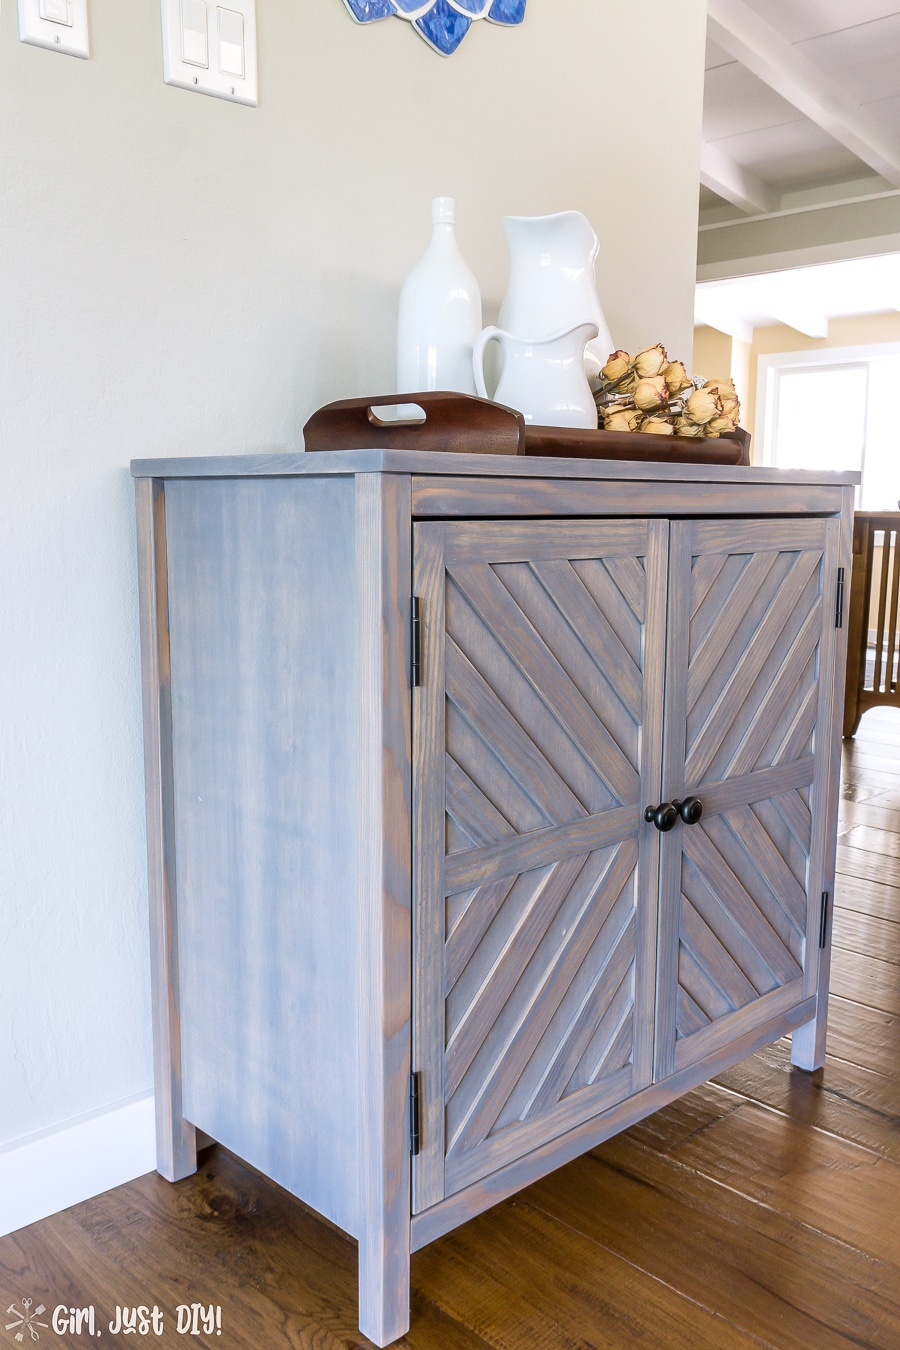 How to build a DIY entryway table with storage chevron storage cabinet